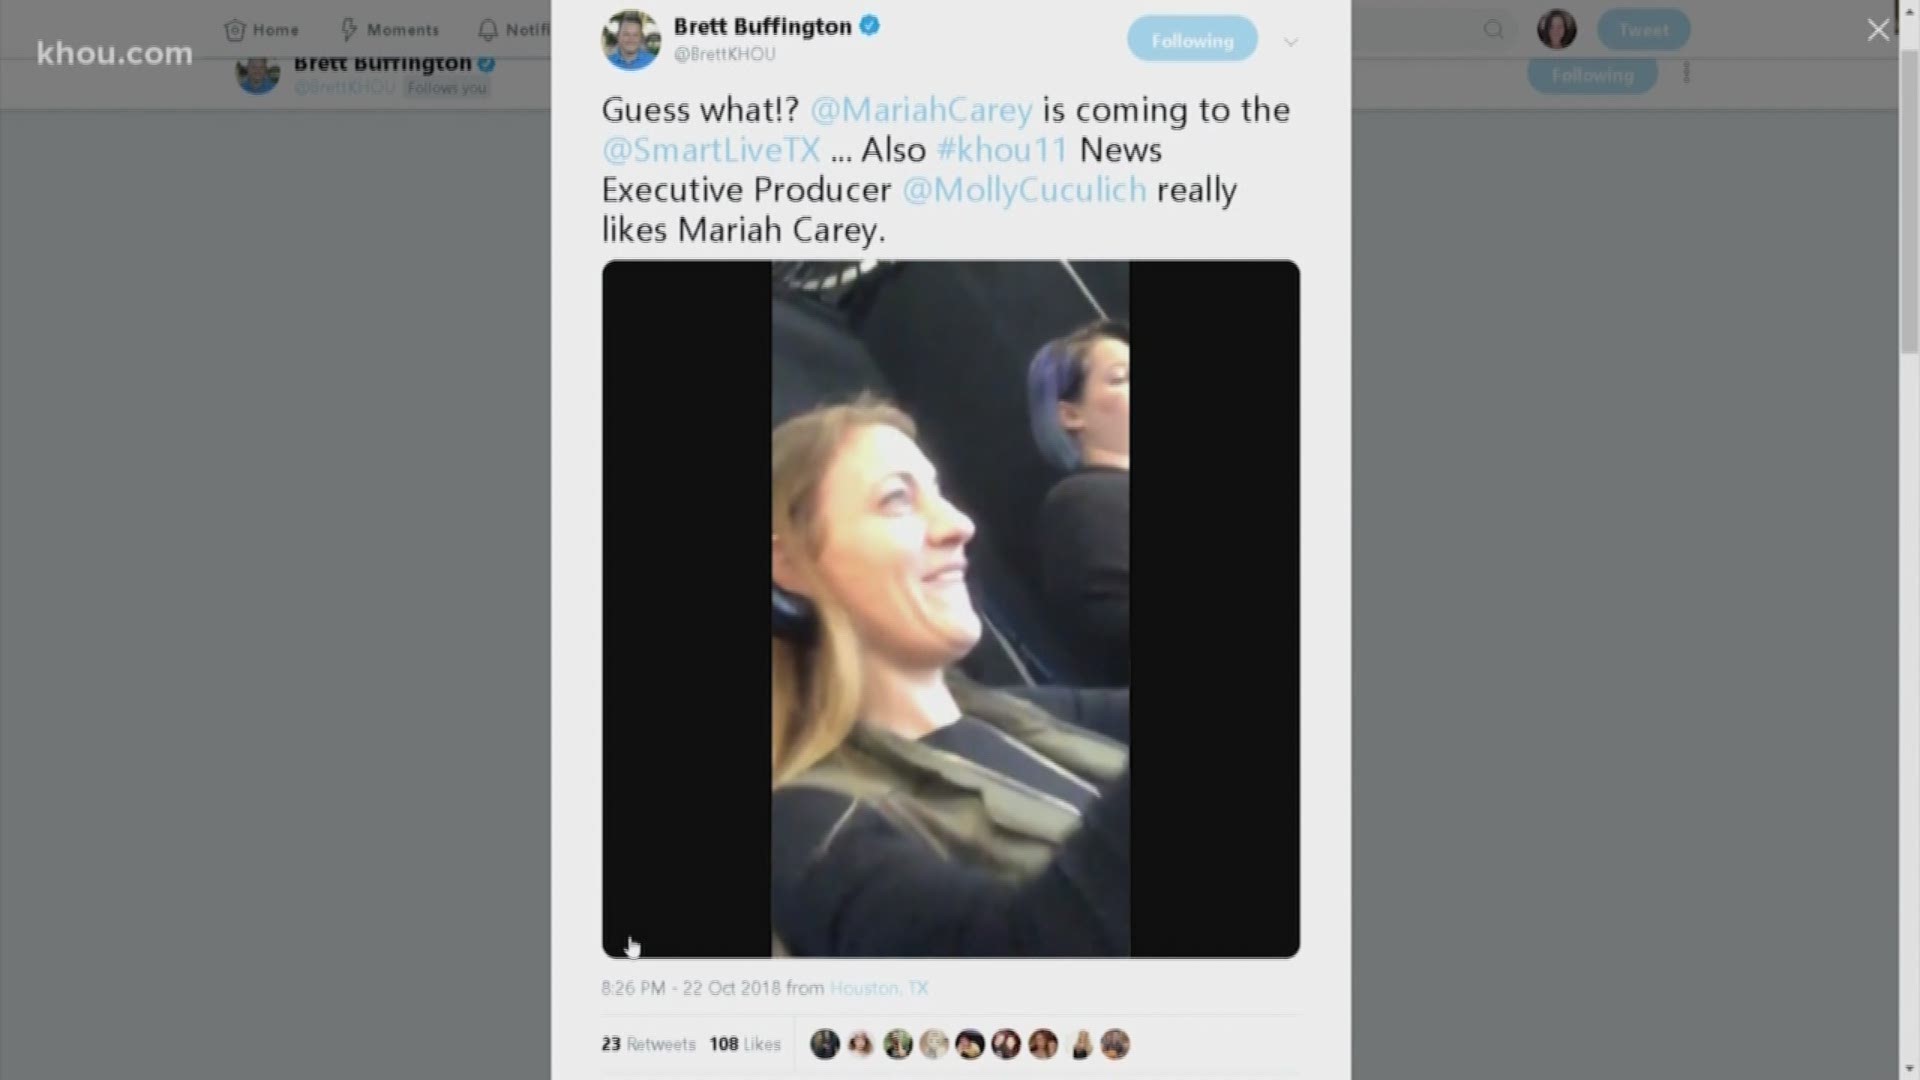 Monday night we shared the news that Mariah Carey was stopping in Houston for her upcoming tour. KHOU 11 Reporter Brett Buffington caught Executive Producer Molly Baker's reaction to the news and posted it on Twitter. Soon afterwards, the international singer retweeted Buffington's post.